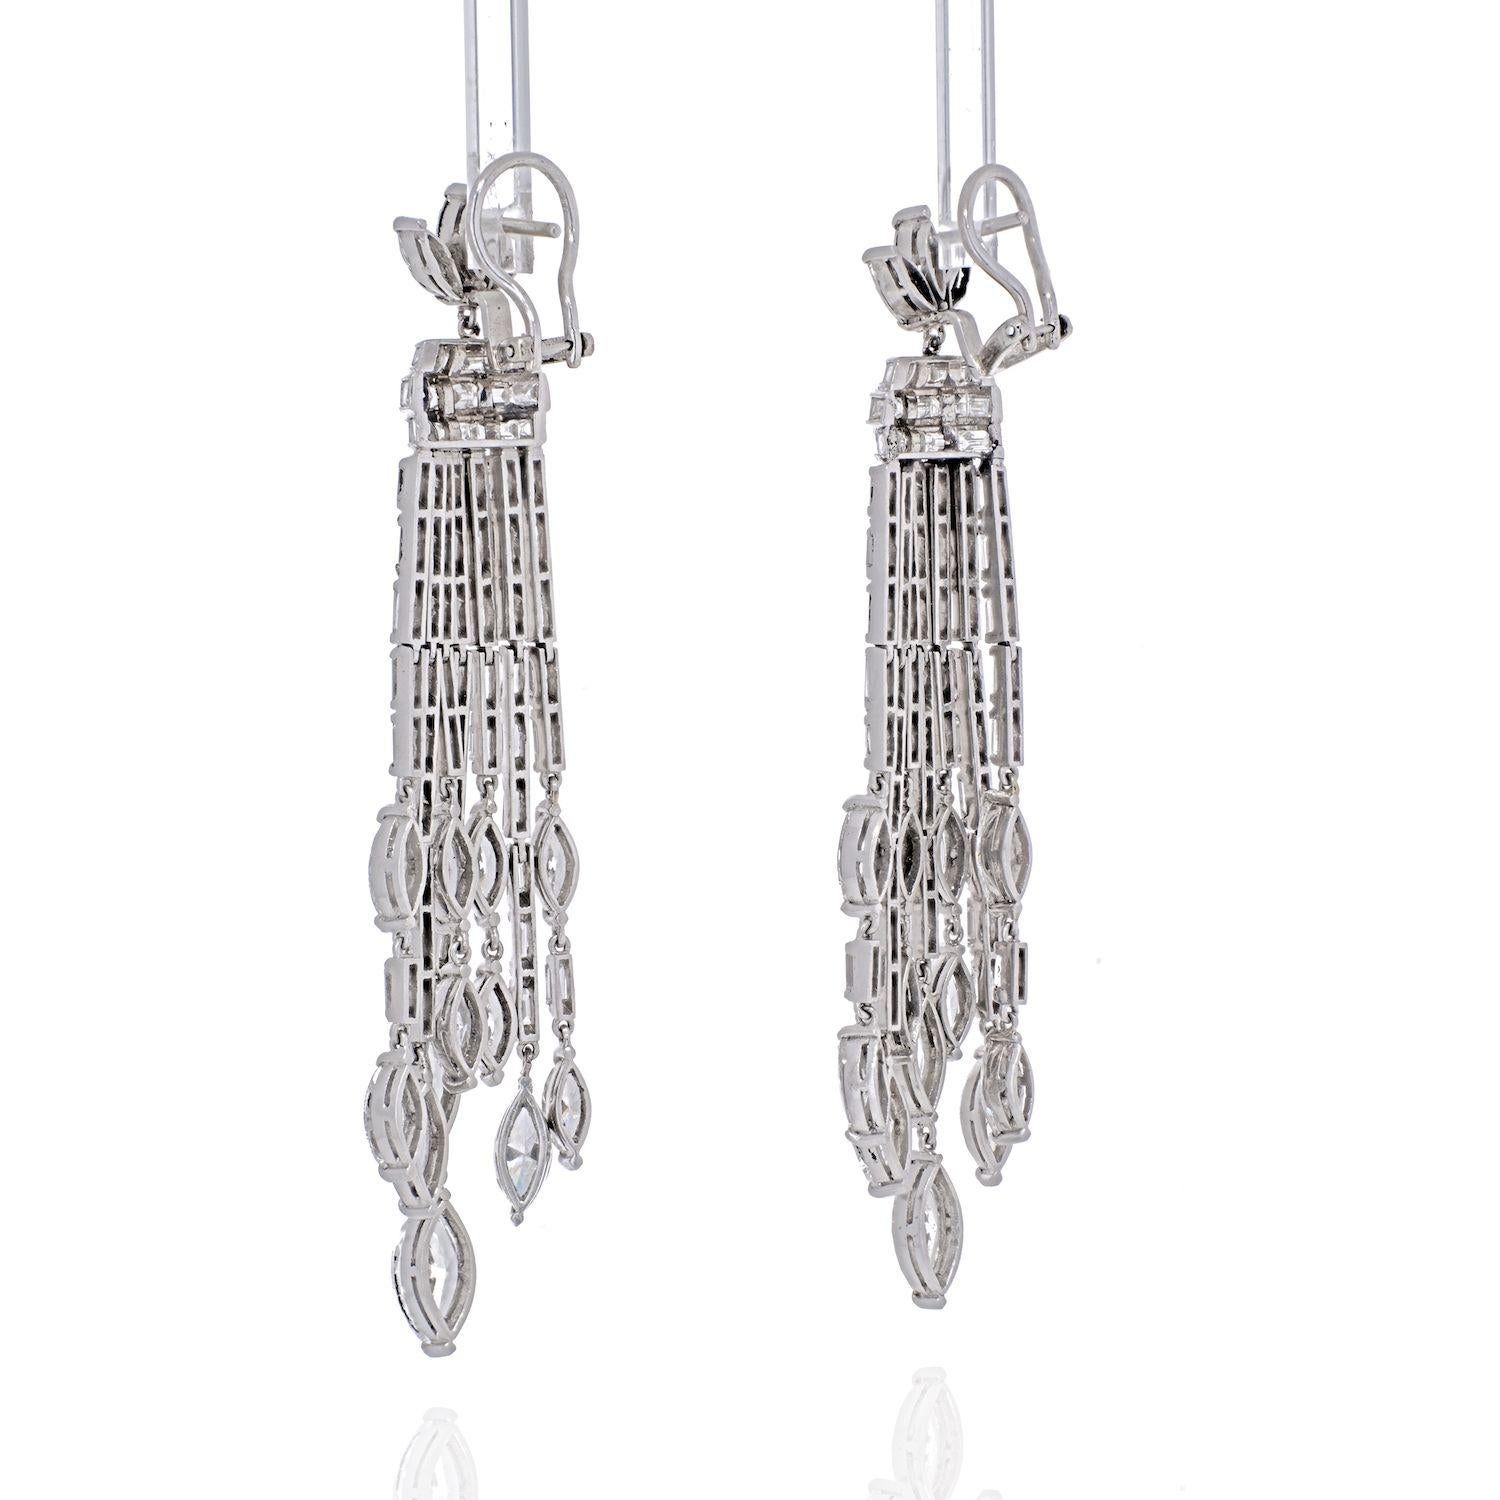 Marquise Cut Platinum 27 Carat Diamond Hanging Chandelier Earrings For Sale